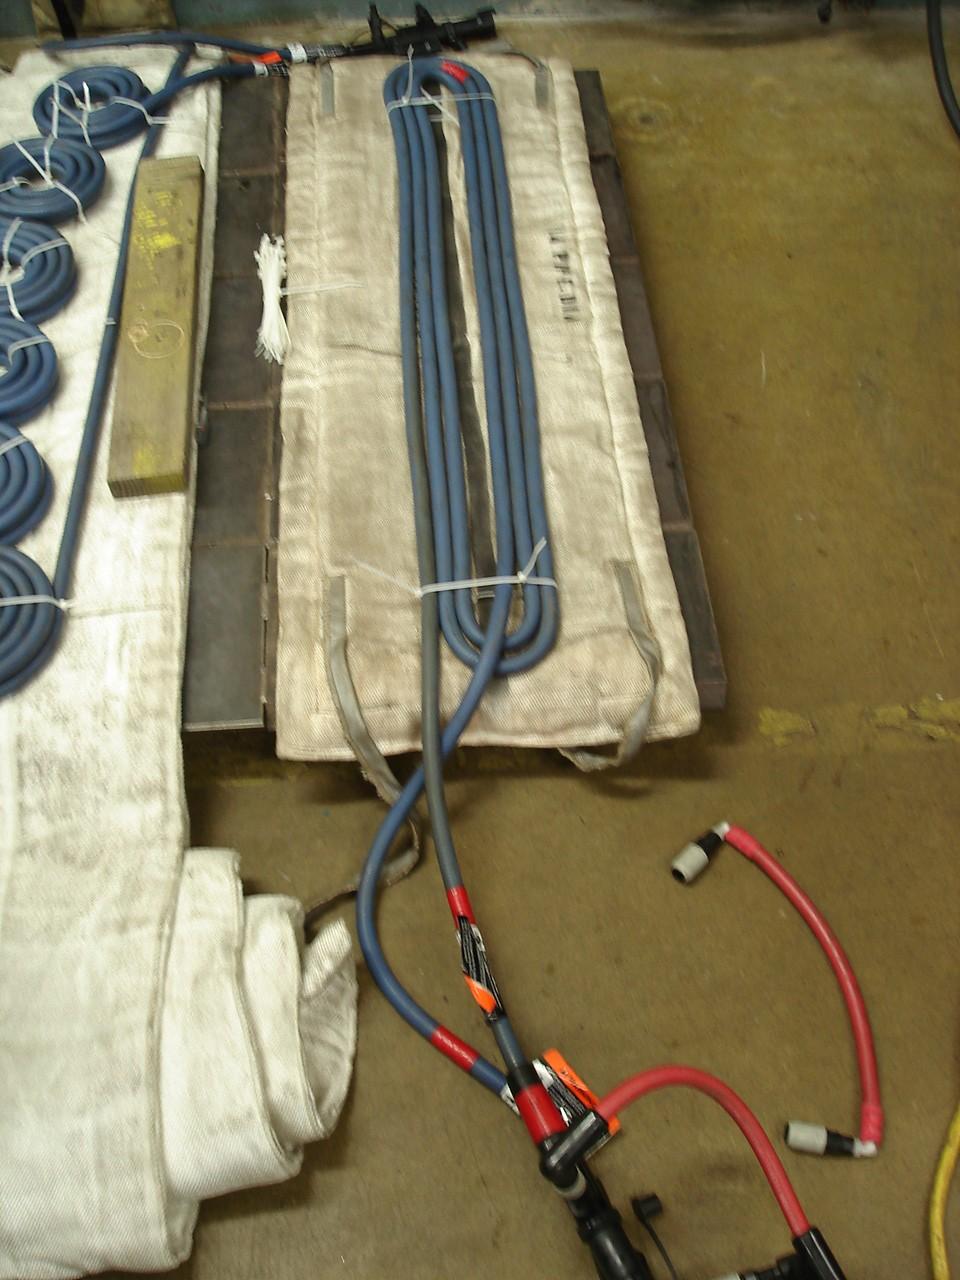 Elongated Coil and Elongated Pancake Configuration Many coil